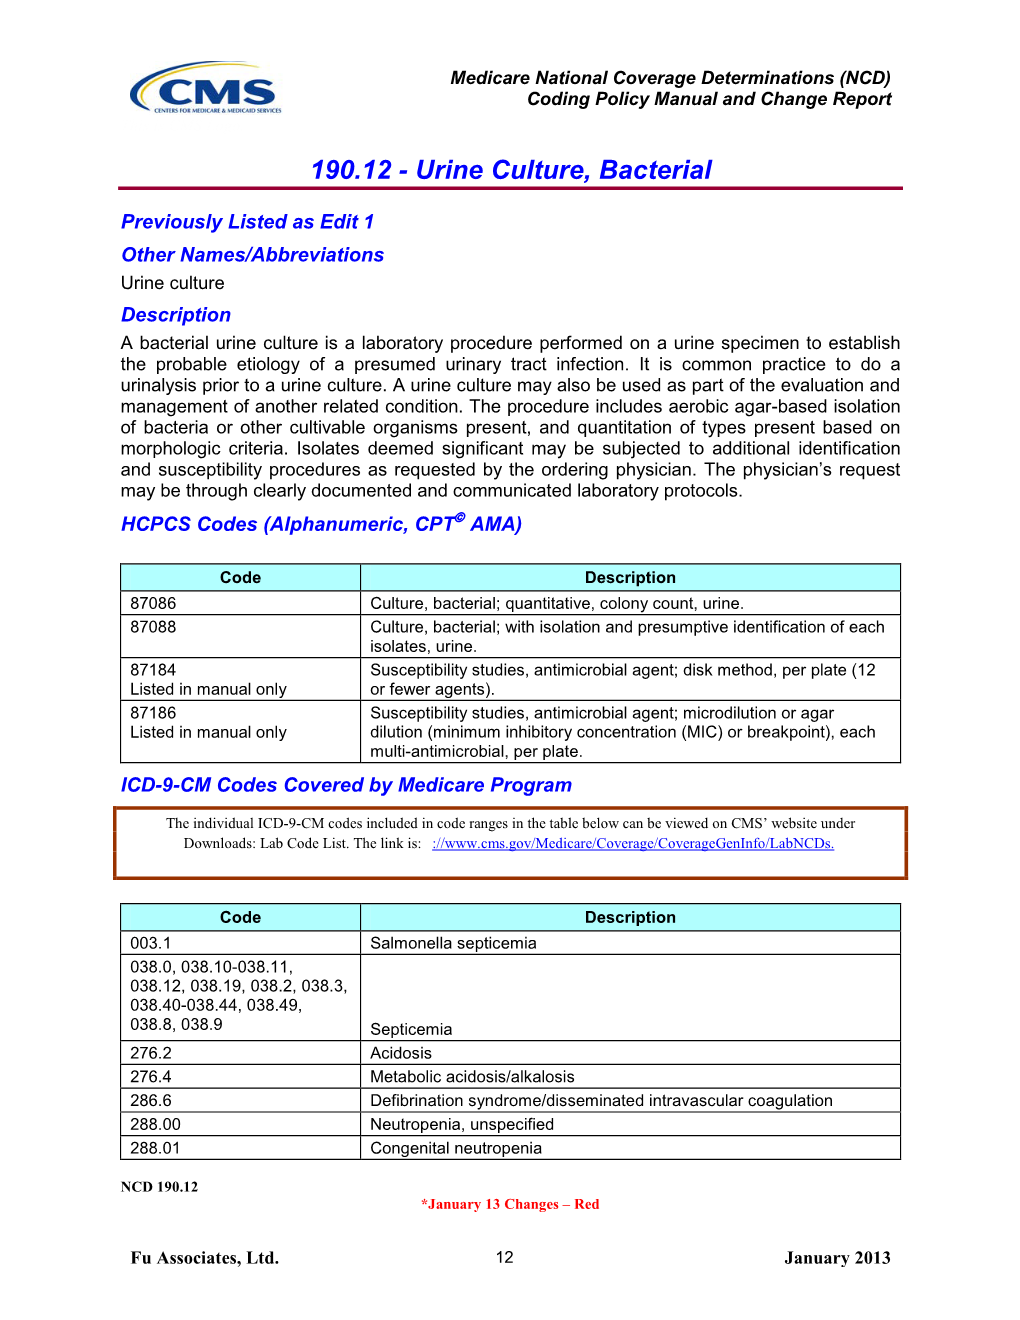 190.12 - Urine Culture, Bacterial